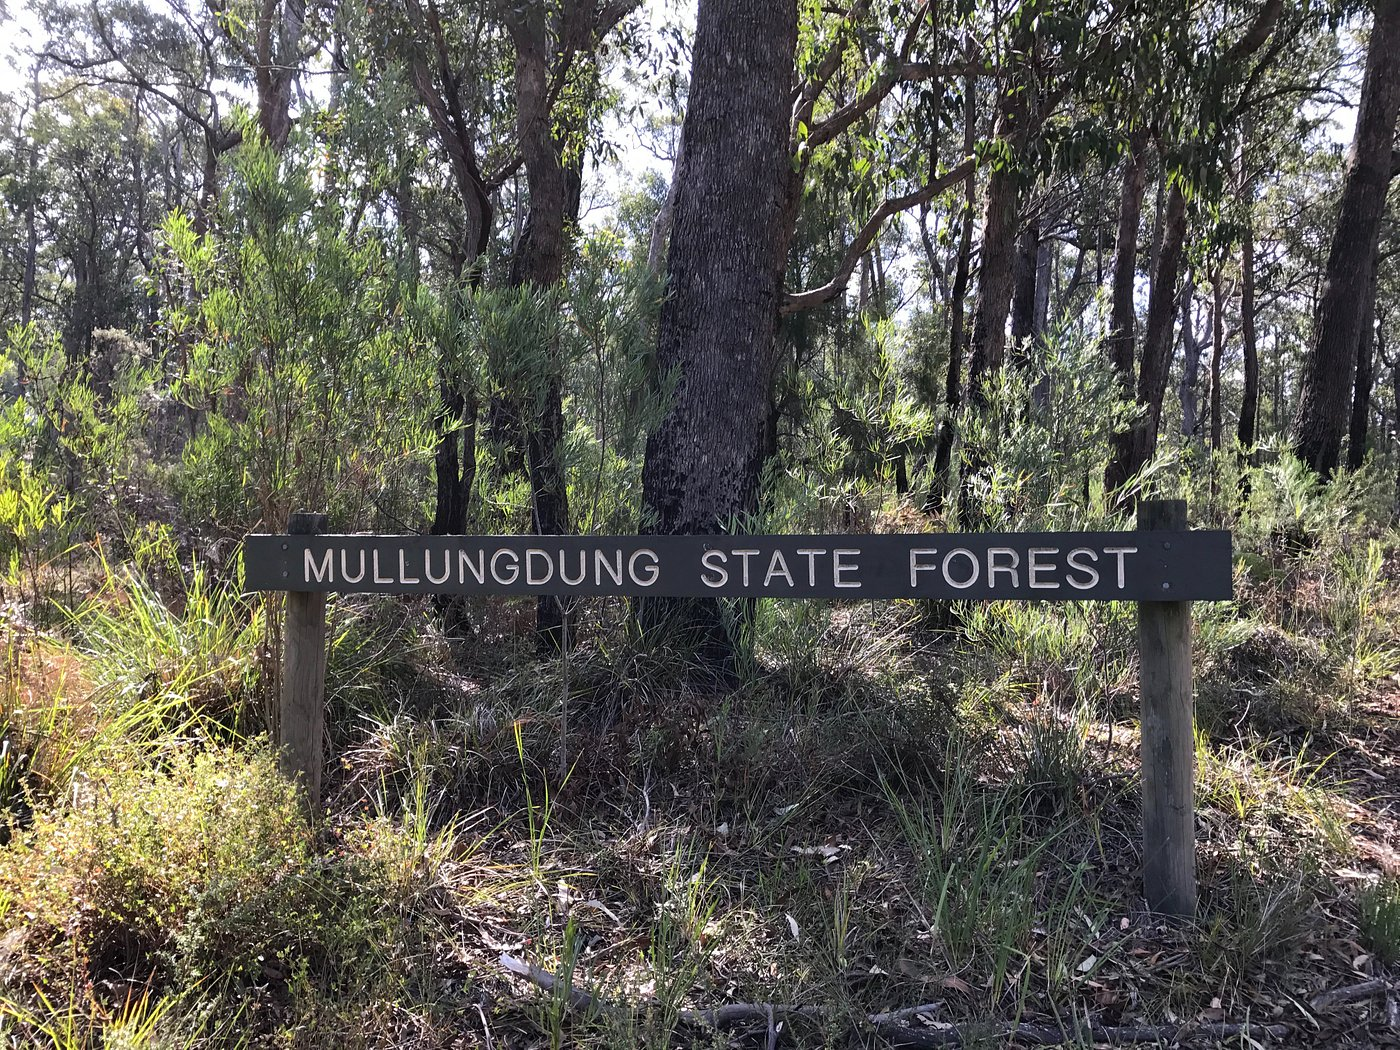 Entrance to Mullungdung State Forest